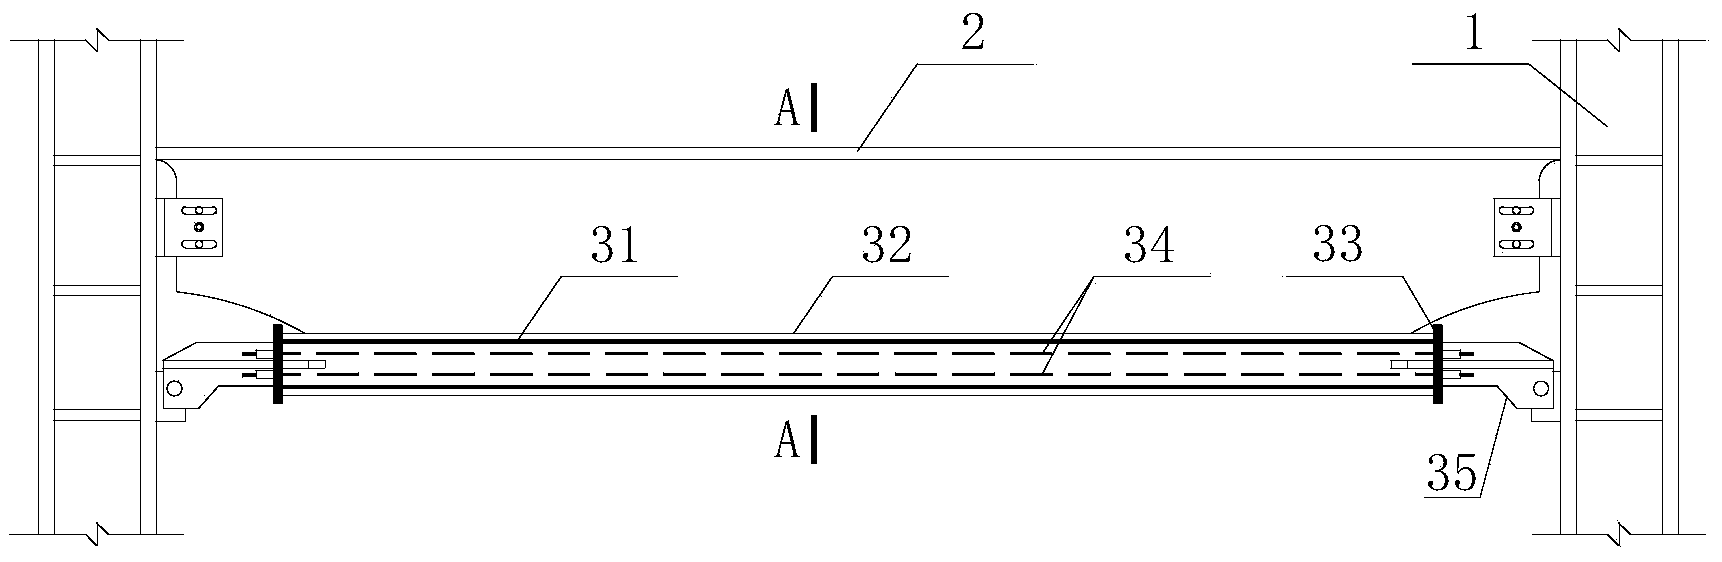 Post-tensioned prestressing self centering steel plate shear wall structure